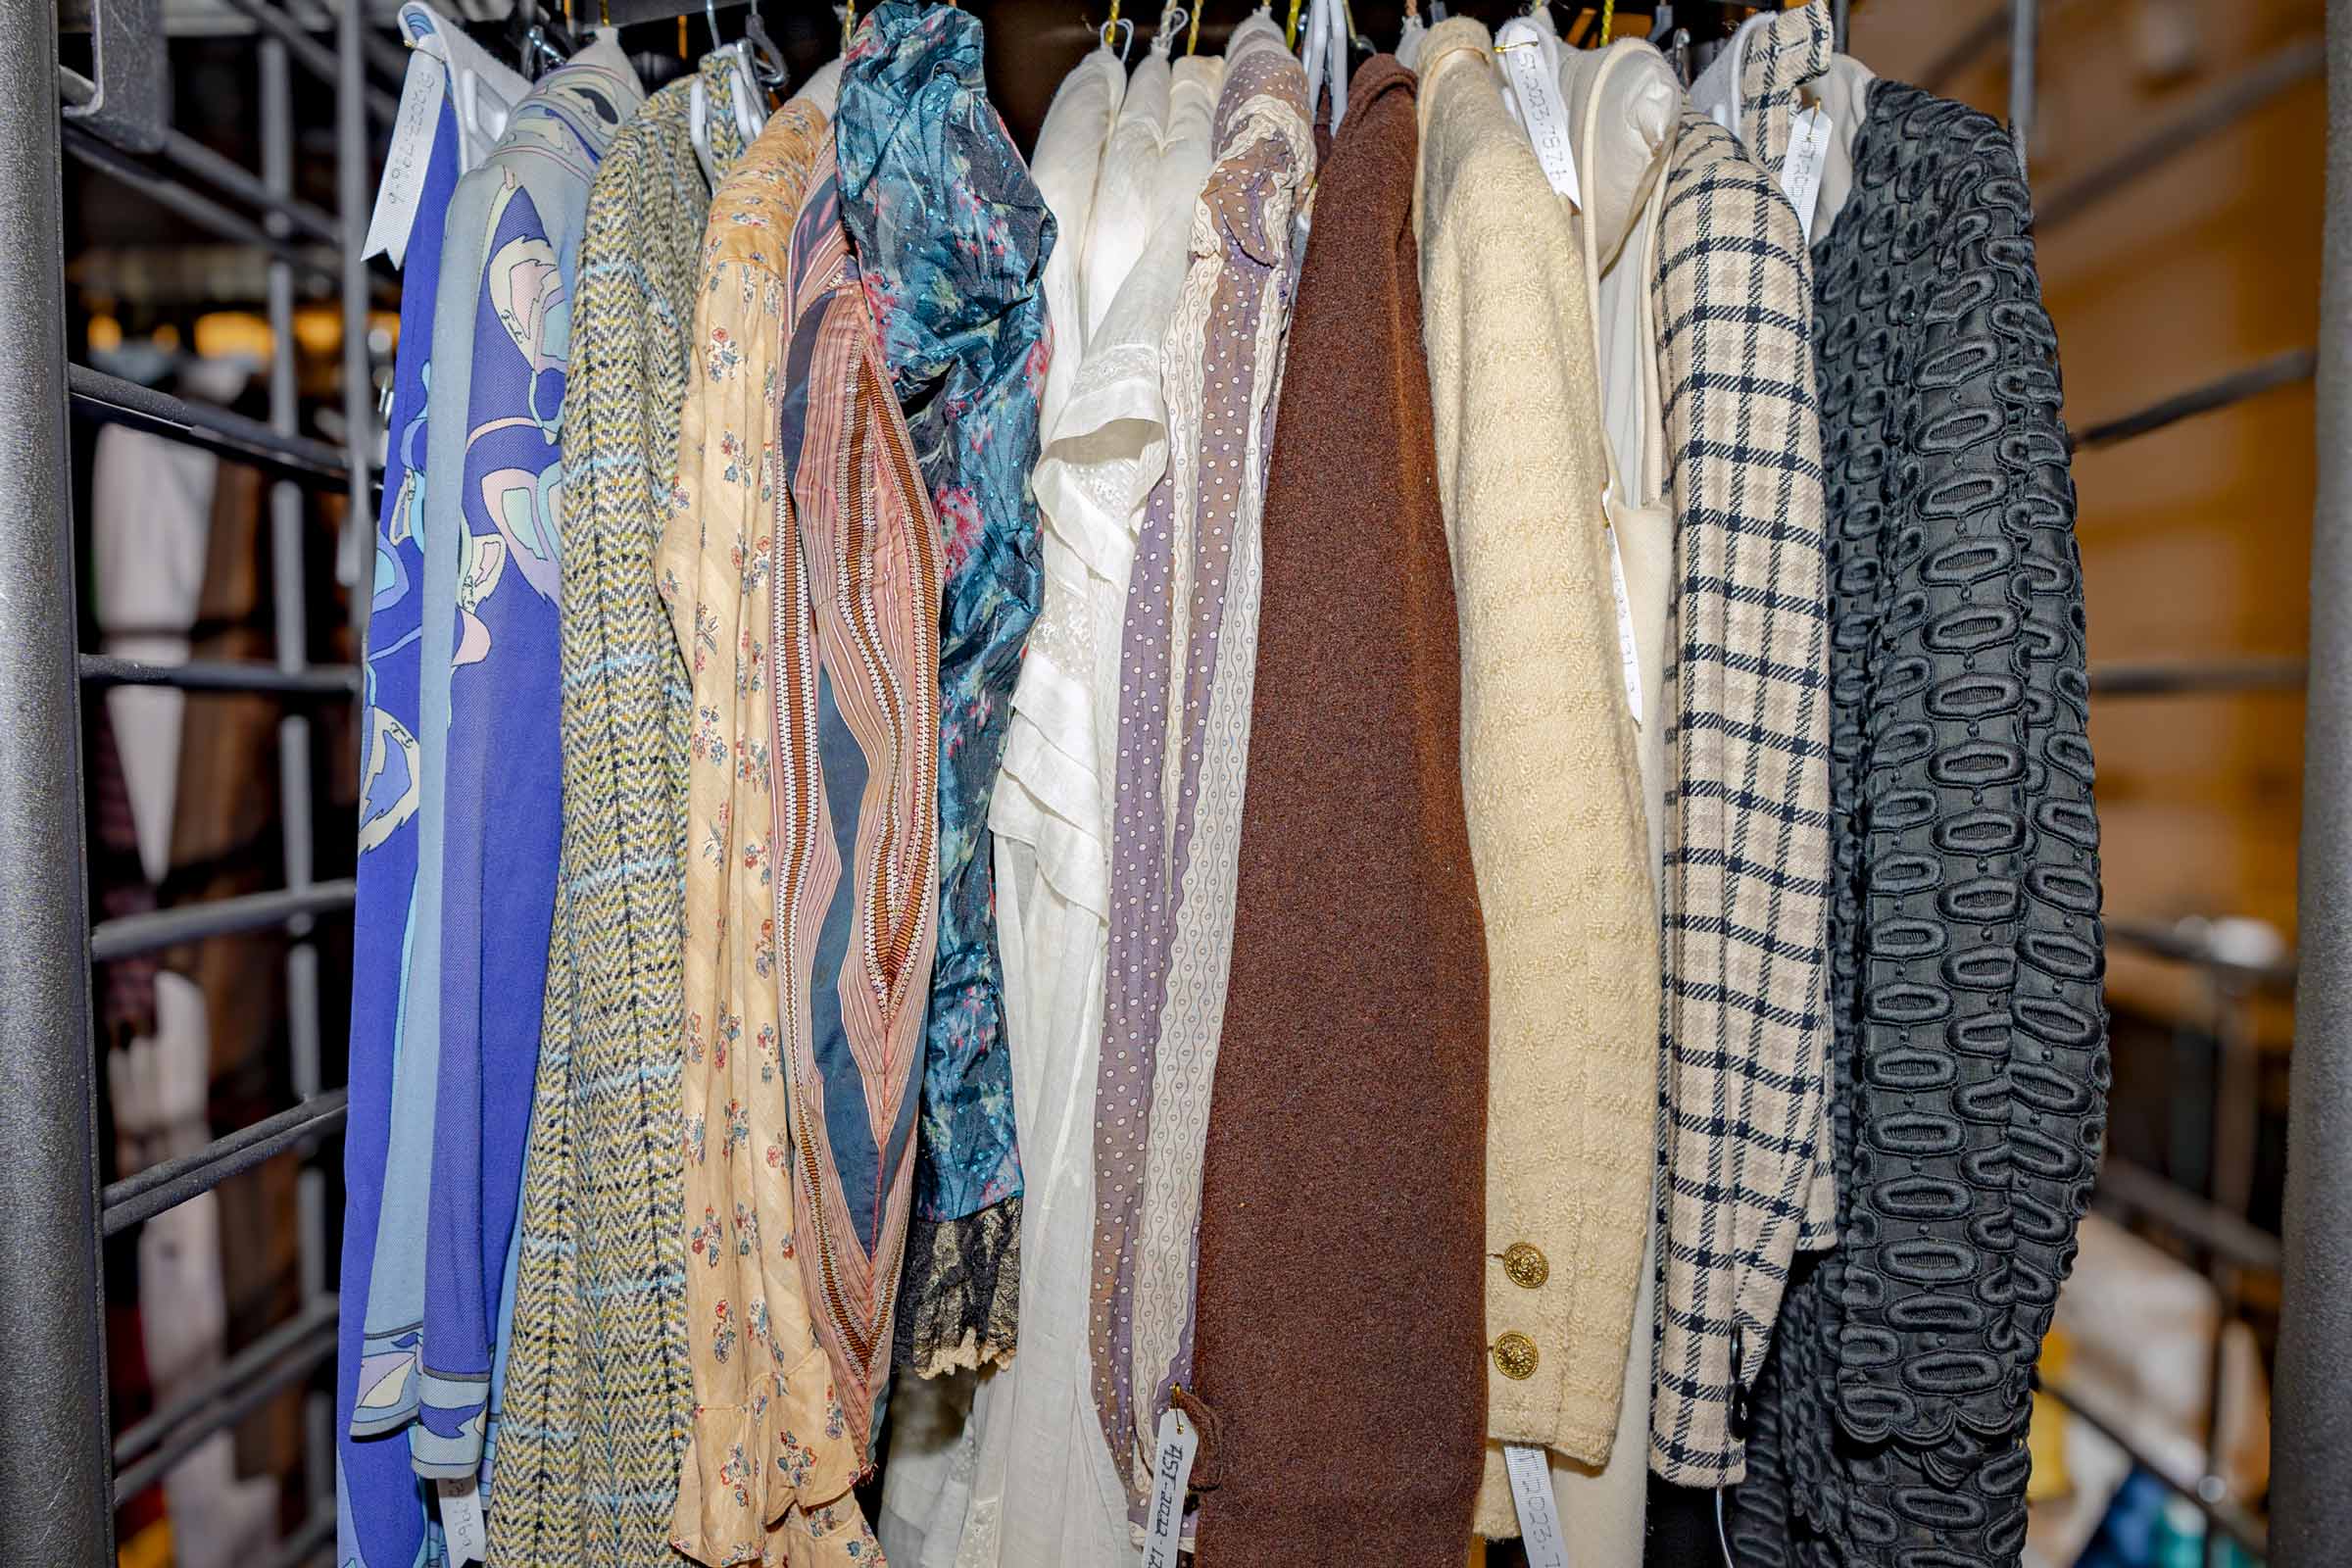 several articles of clothing hang together on a rack